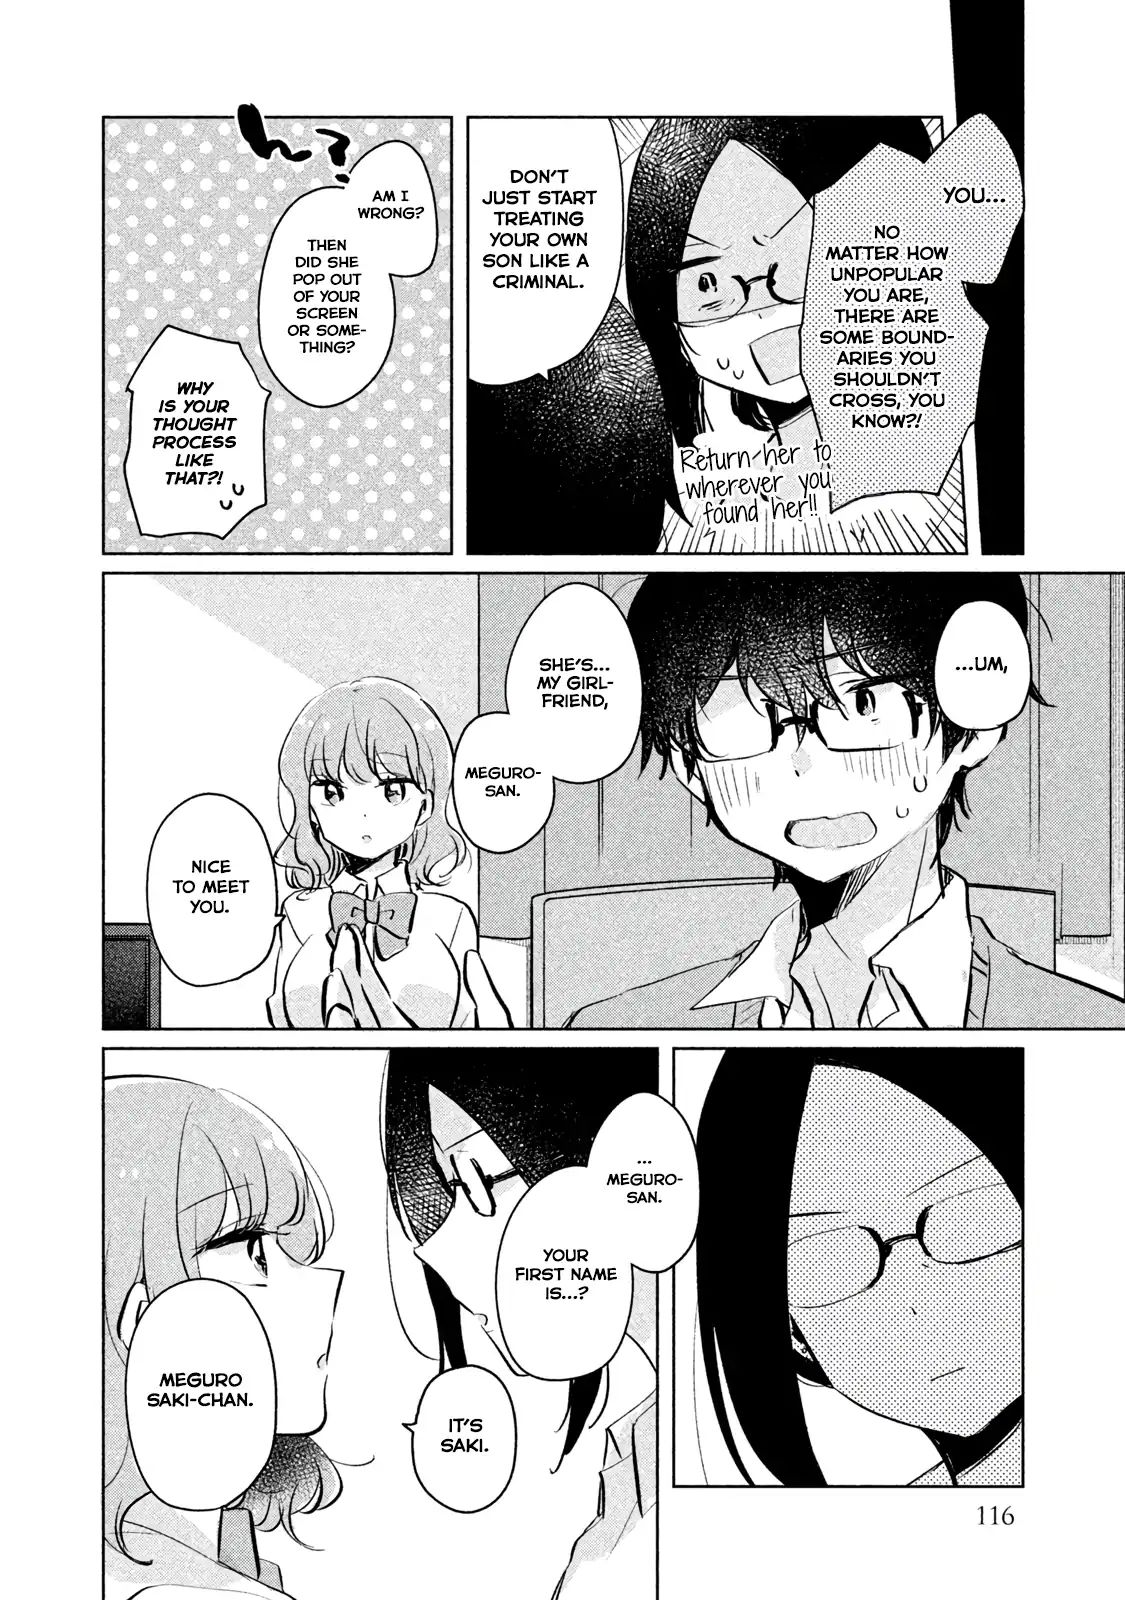 It's Not Meguro-san's First Time chapter 9 page 10